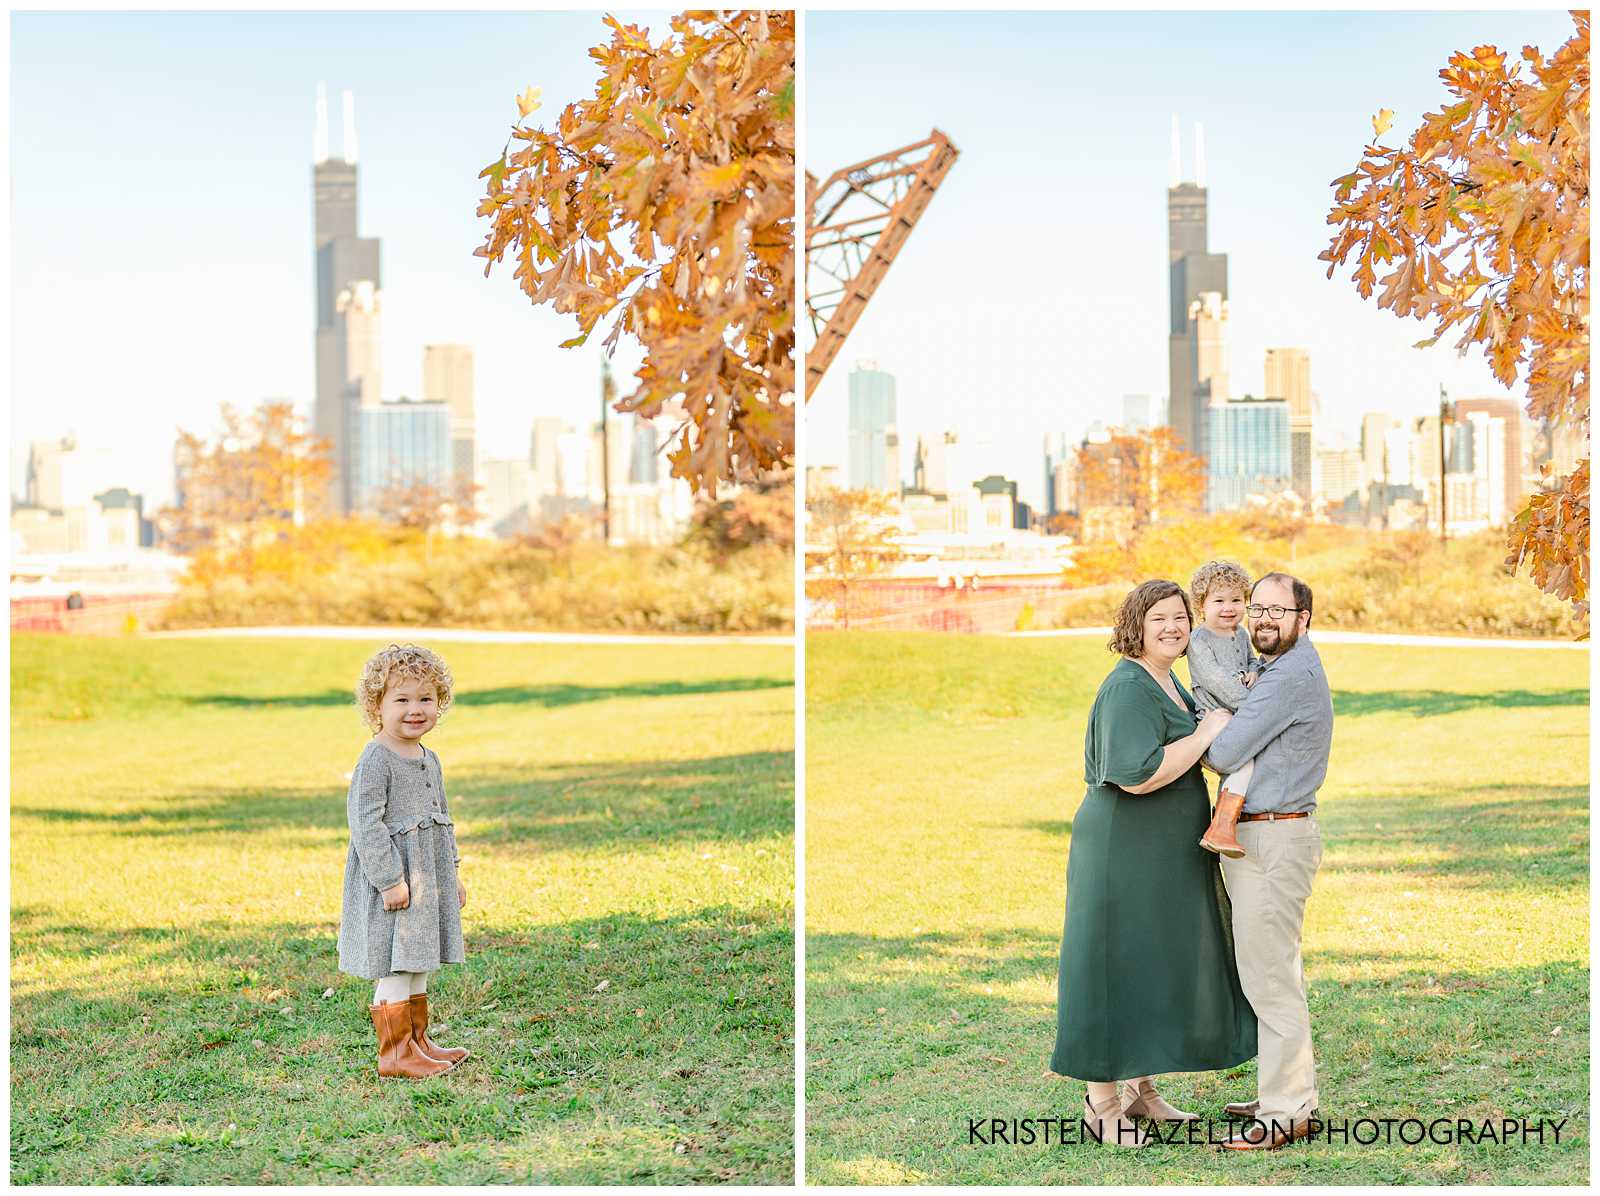 Family photos at Ping Tom Memorial Park in Chicago with the city skyline and St Charles Air Line train bridge in the background